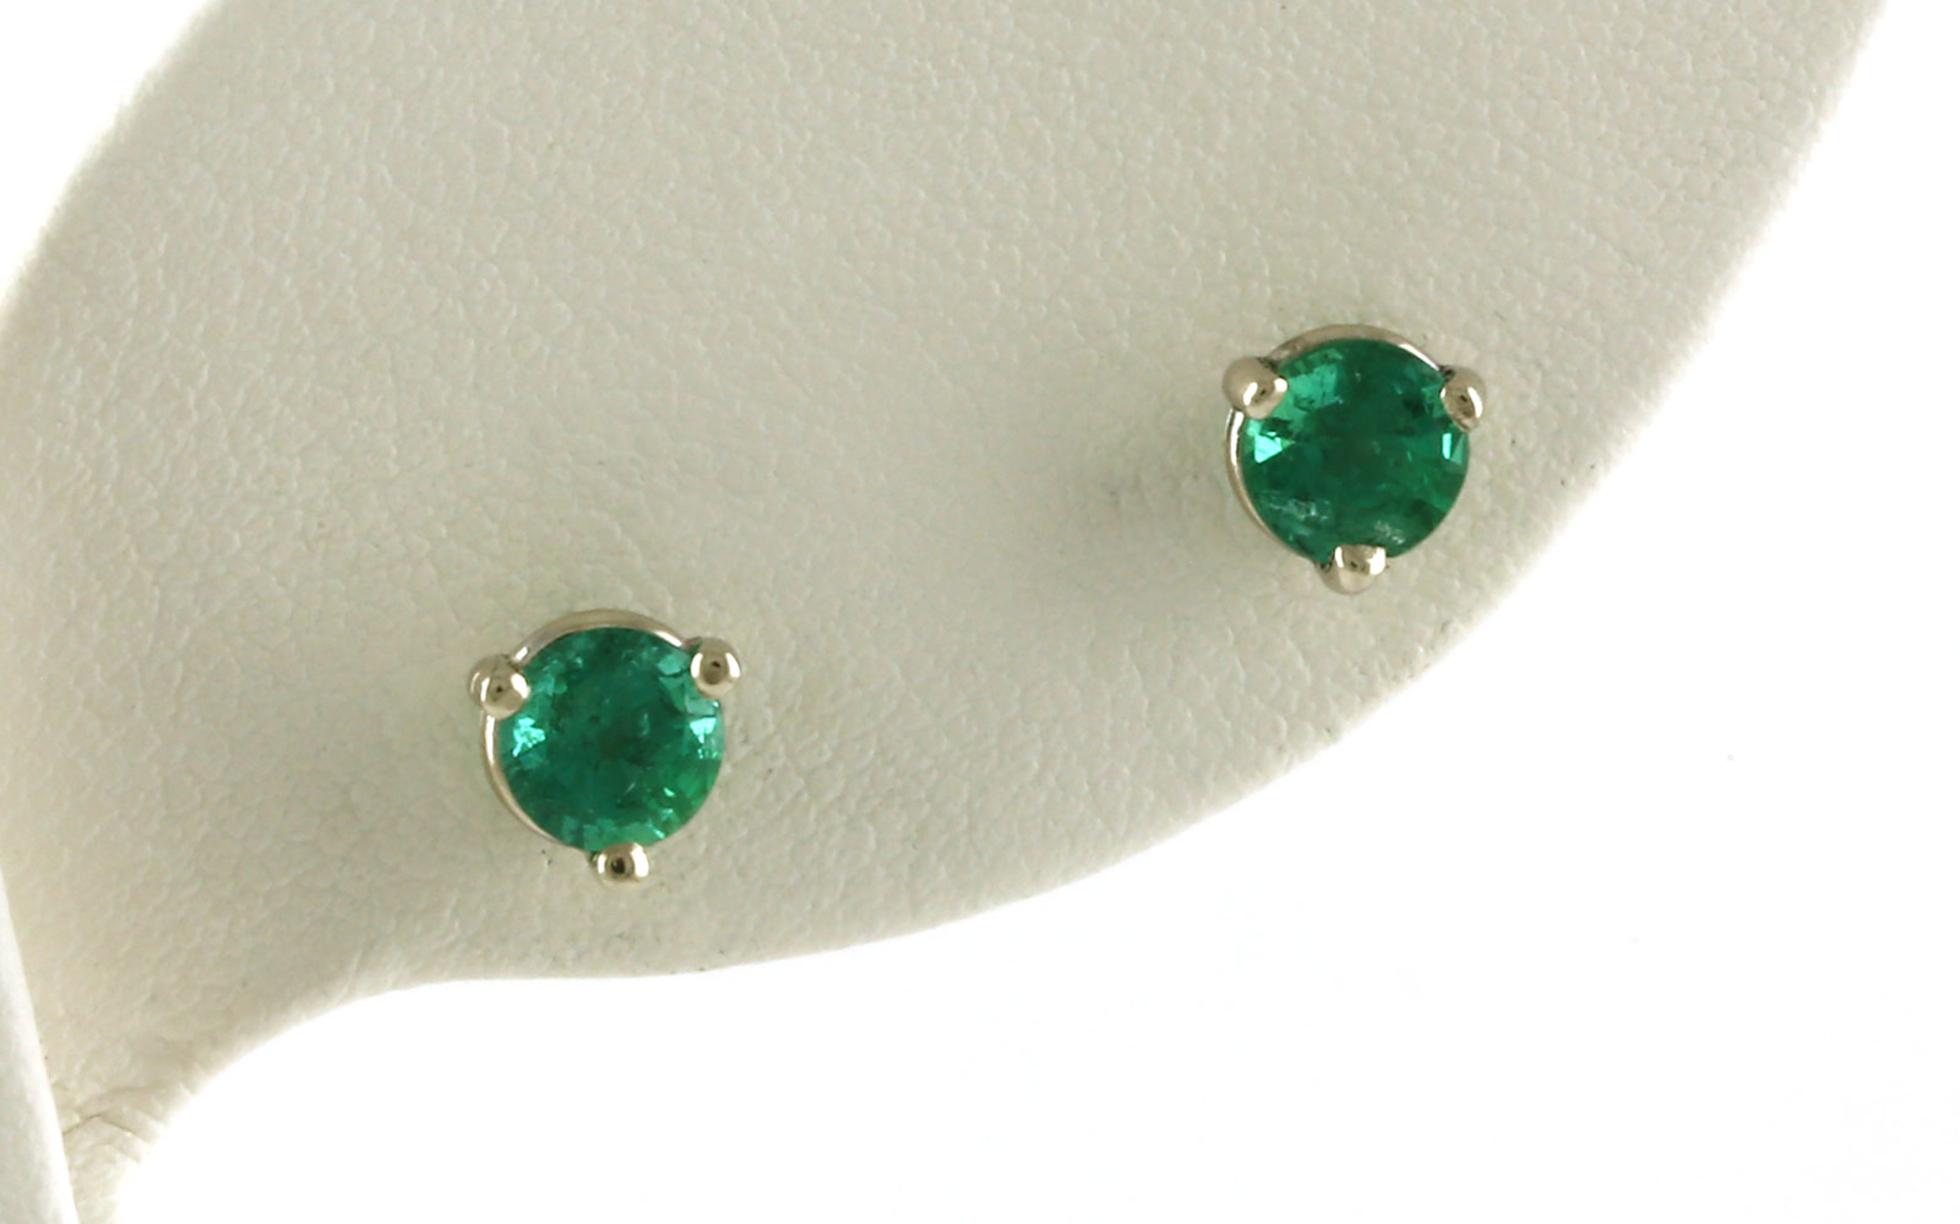 Emerald Stud Earrings in 3-Prong Martini Settings in White Gold (0.87cts TWT)